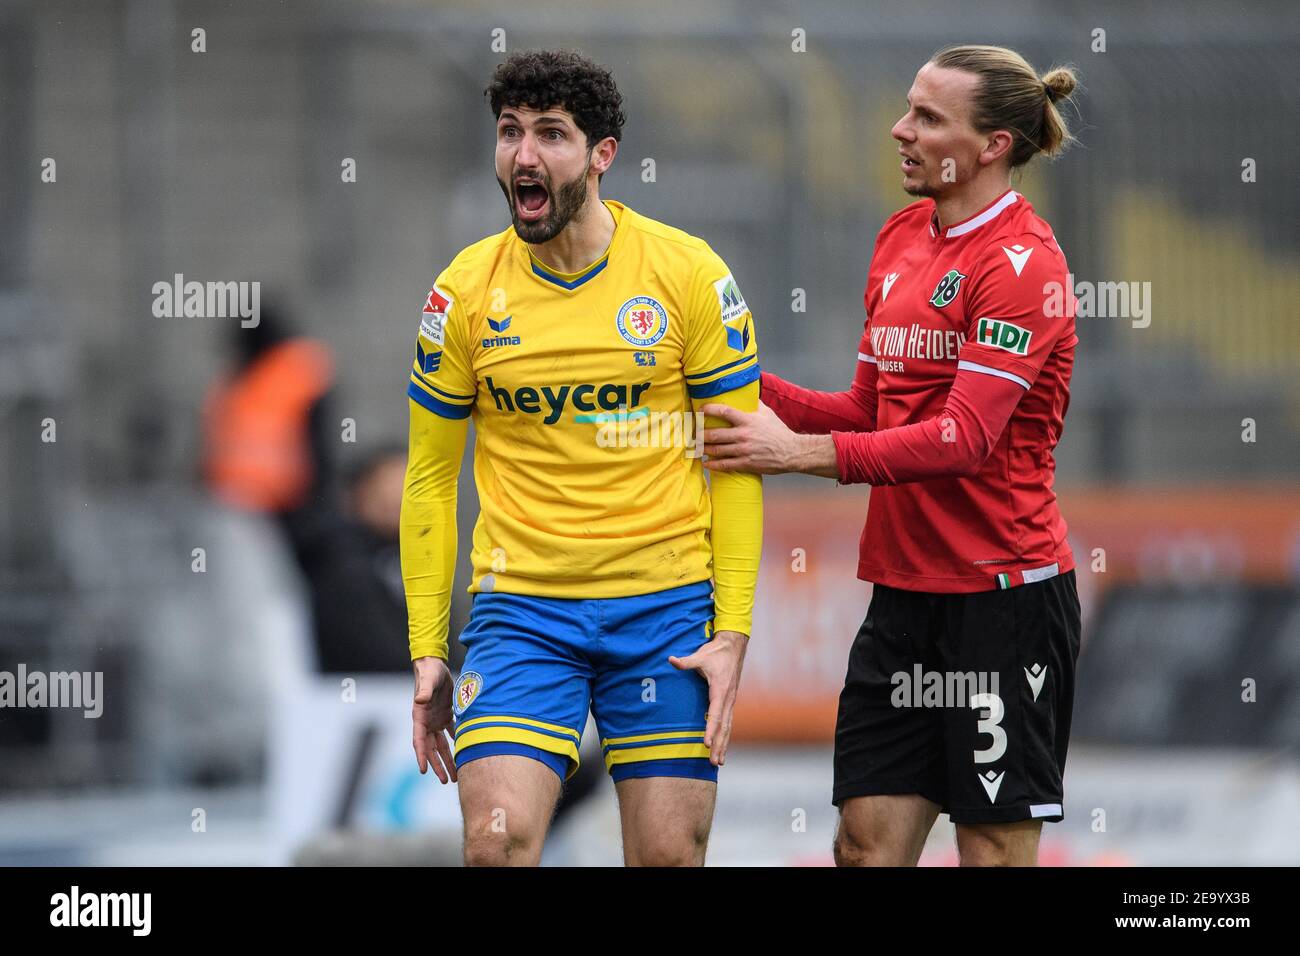 Brunswick, Germany. 06th Feb, 2021. Football: 2. Bundesliga, Eintracht Braunschweig - Hannover 96, Matchday 20 at Eintracht-Stadion. Braunschweig's Fabio Kaufmann (l) and Hannover's Niklas Hult are on the pitch. Credit: Swen Pförtner/dpa - IMPORTANT NOTE: In accordance with the regulations of the DFL Deutsche Fußball Liga and/or the DFB Deutscher Fußball-Bund, it is prohibited to use or have used photographs taken in the stadium and/or of the match in the form of sequence pictures and/or video-like photo series./dpa/Alamy Live News Stock Photo